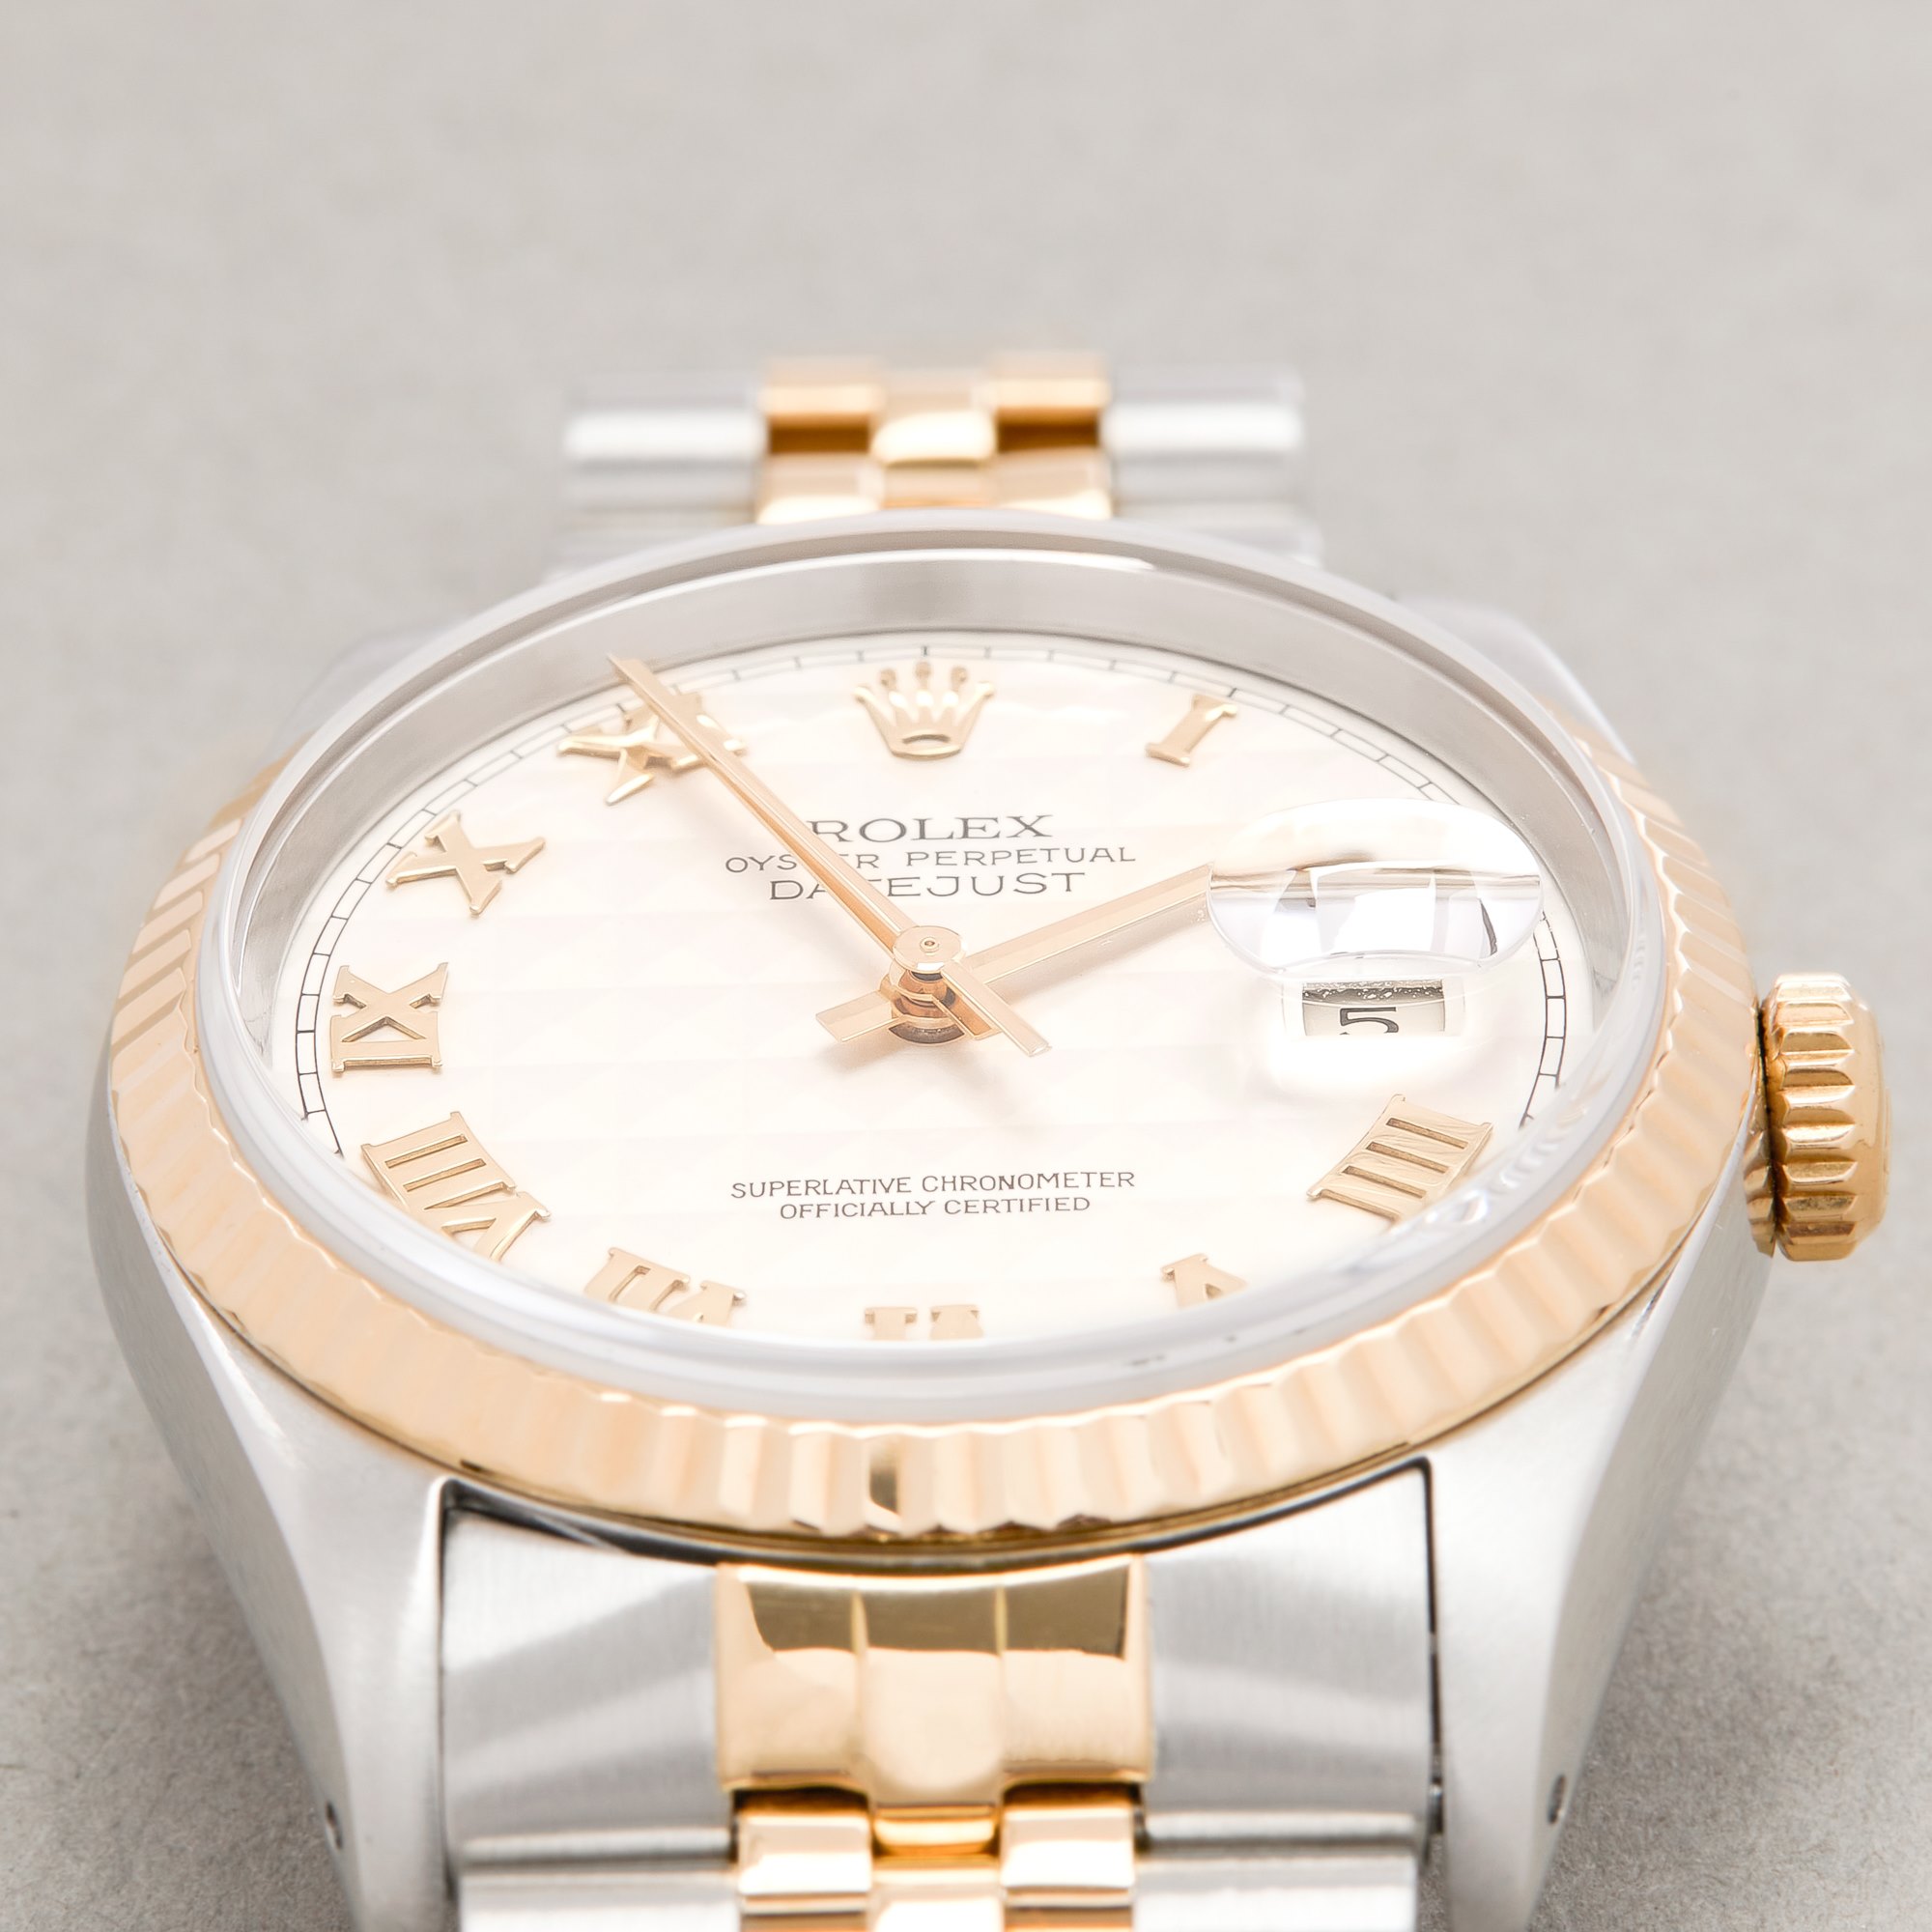 Rolex Datejust 36 Pyramid Dial 18K Yellow Gold & Stainless Steel 16233